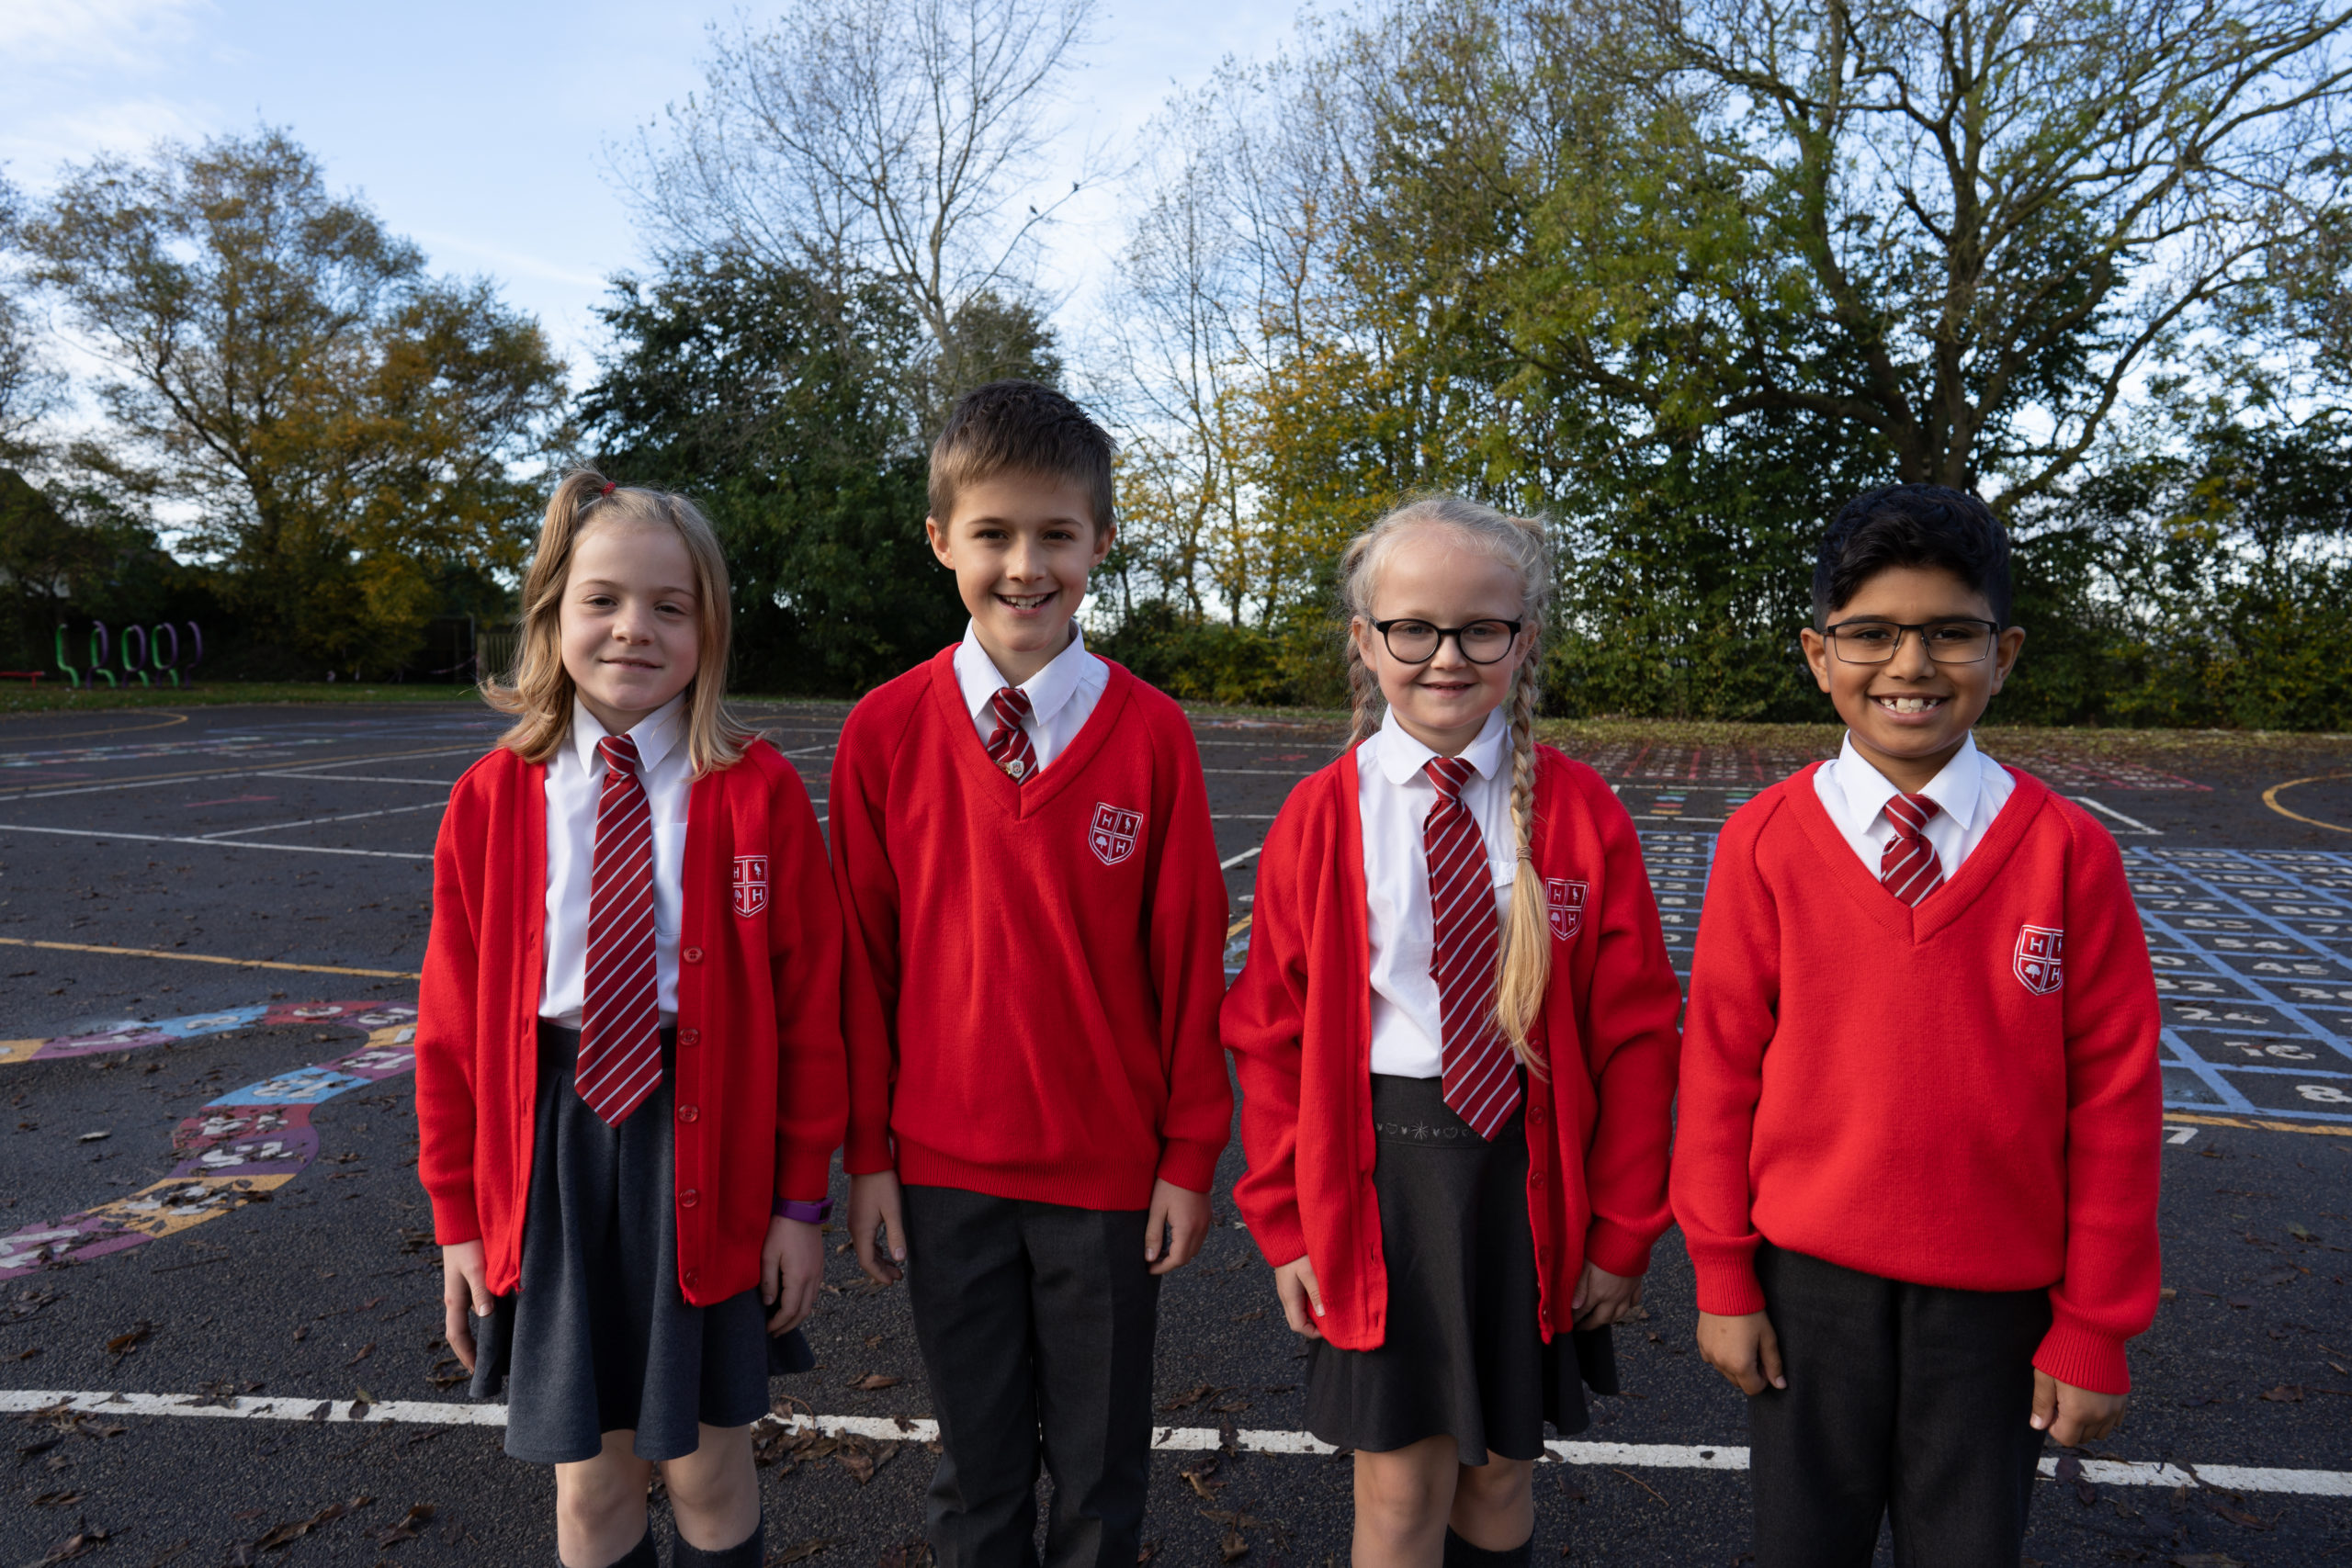 Four young pupils, two boys and two girls, are pictured standing alongside one another on the academy grounds. They are dressed in their academy uniform and smiling for the camera.